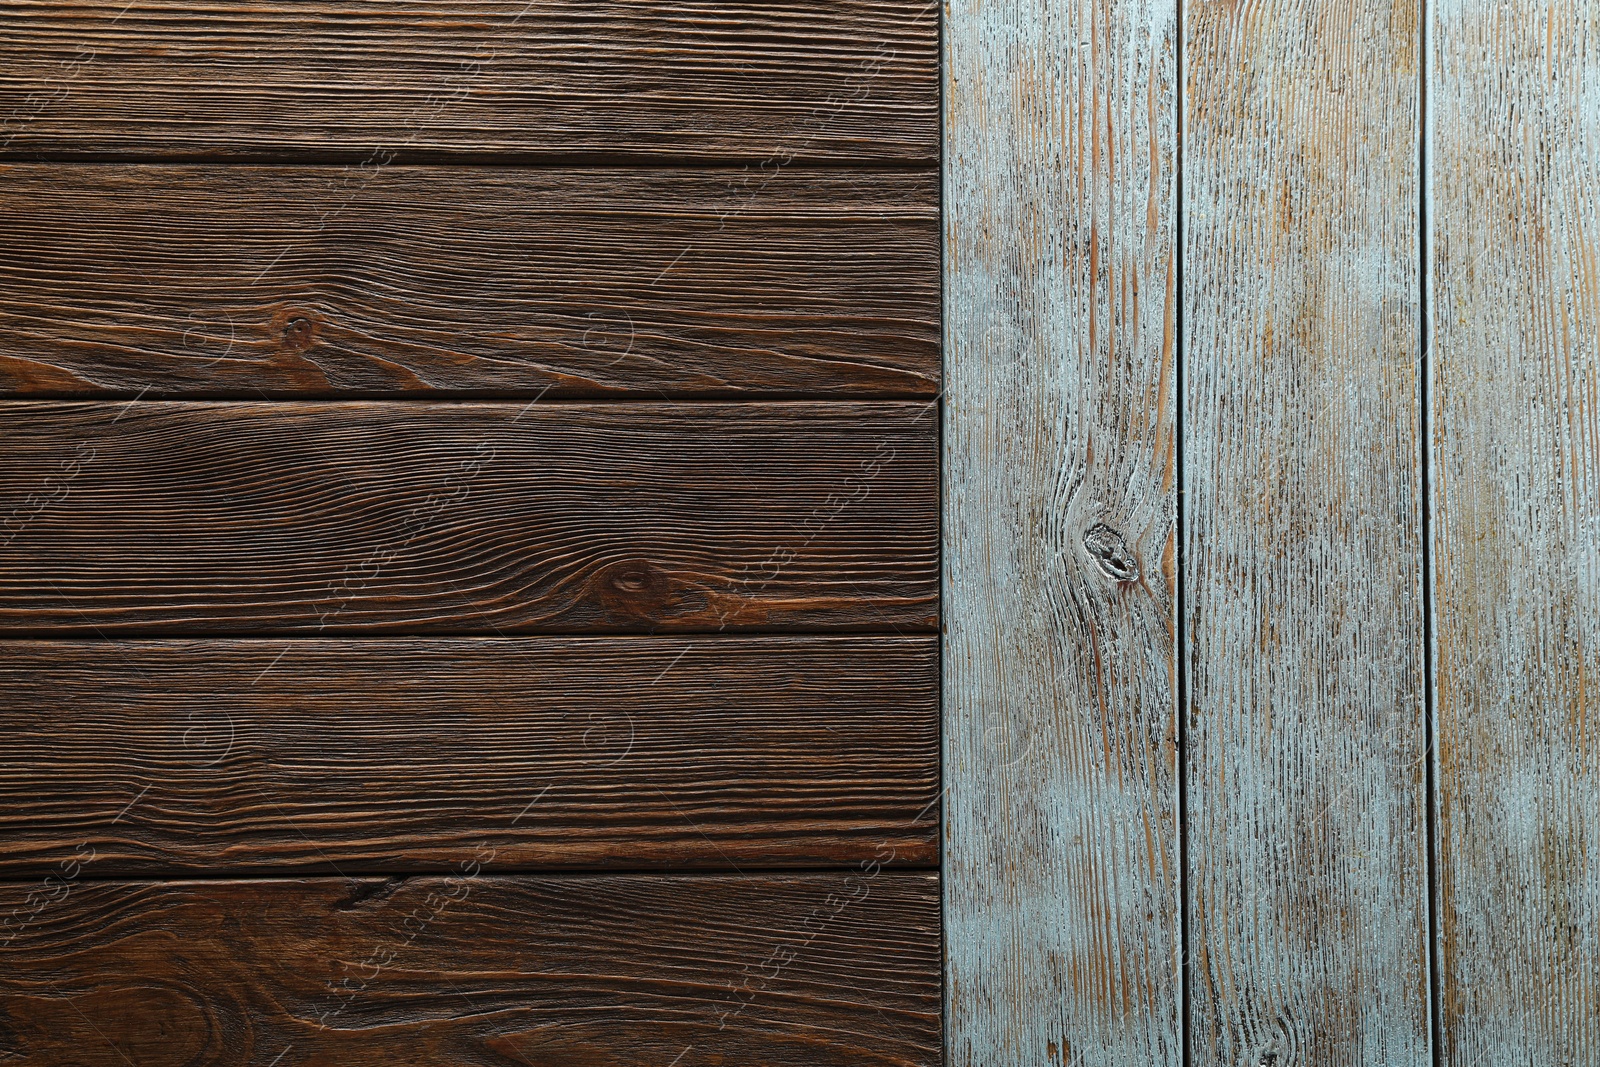 Photo of Texture of rustic wooden surfaces as background, top view